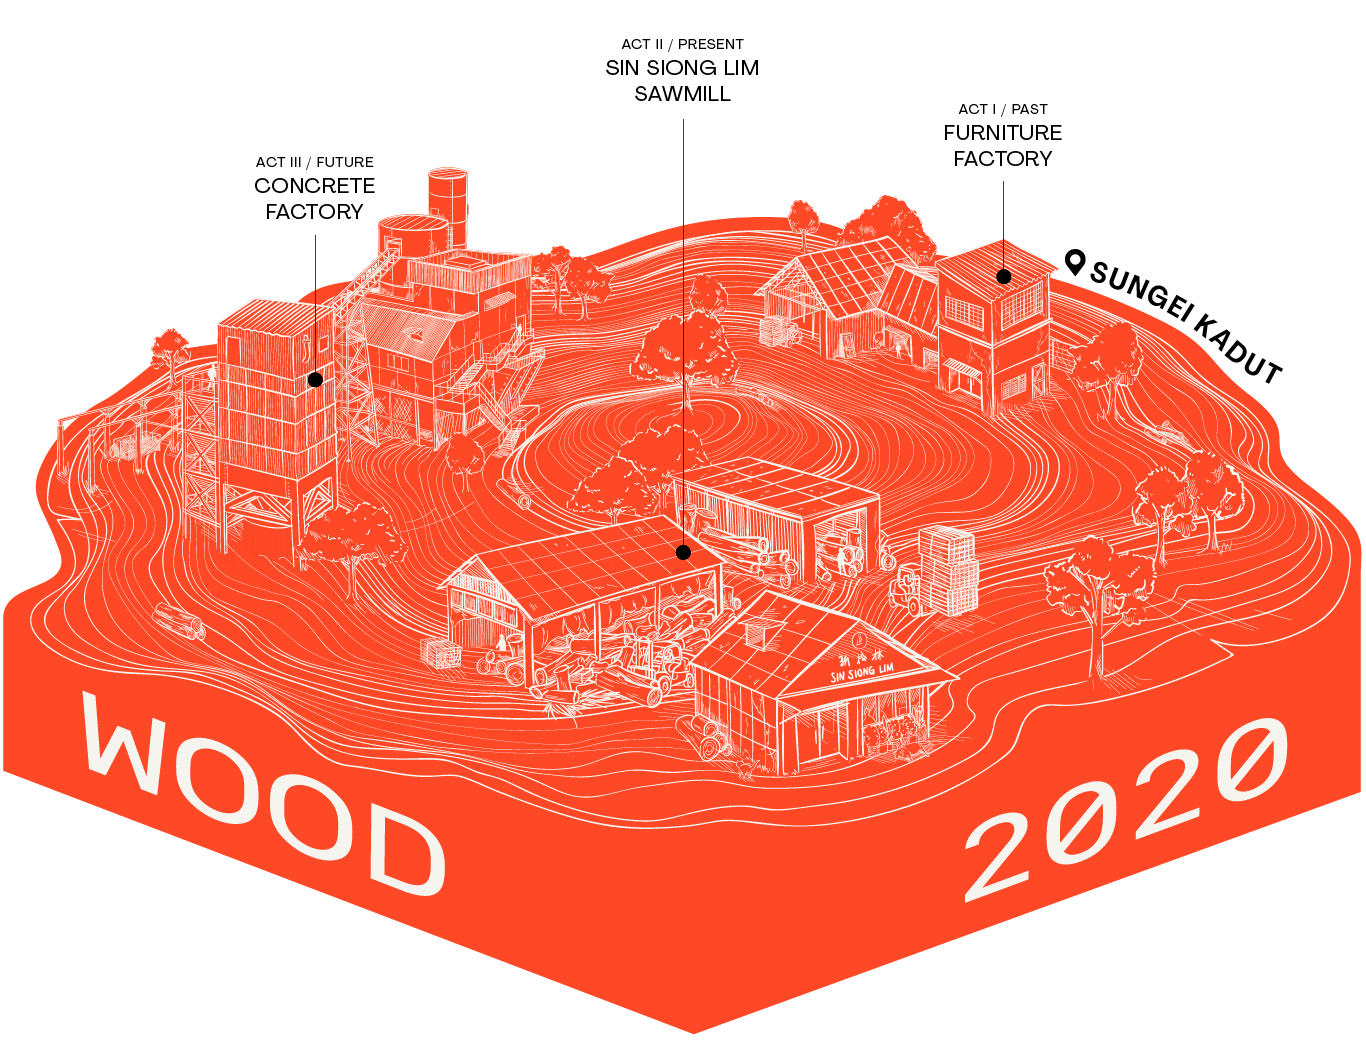 WOOD 2020 hero image, illustrated wood cross-section highlighting three sites, furniture factory, concrete factory, sawmill